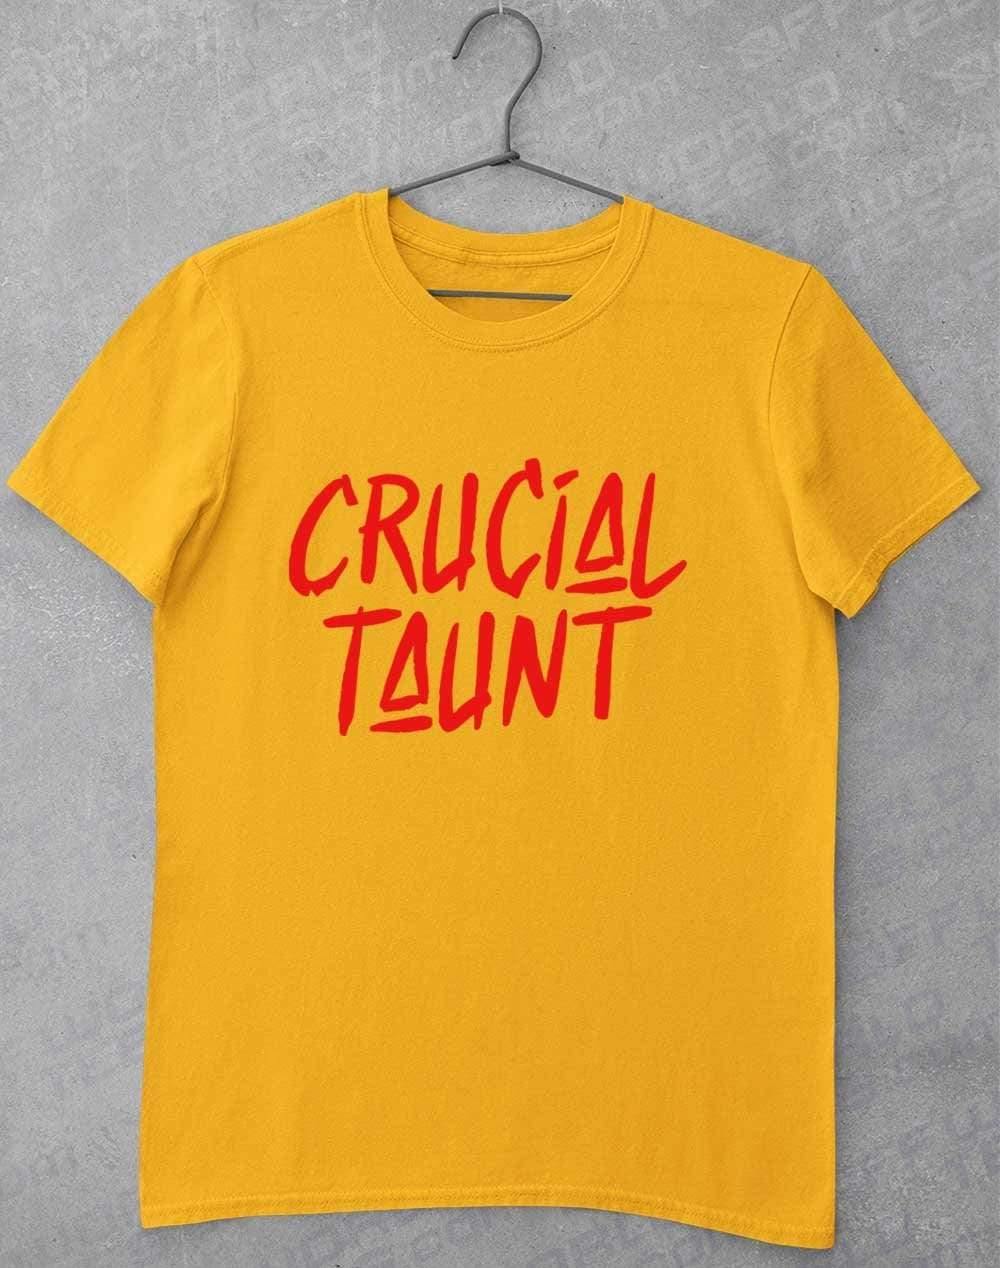 Crucial Taunt T-Shirt S / Gold  - Off World Tees